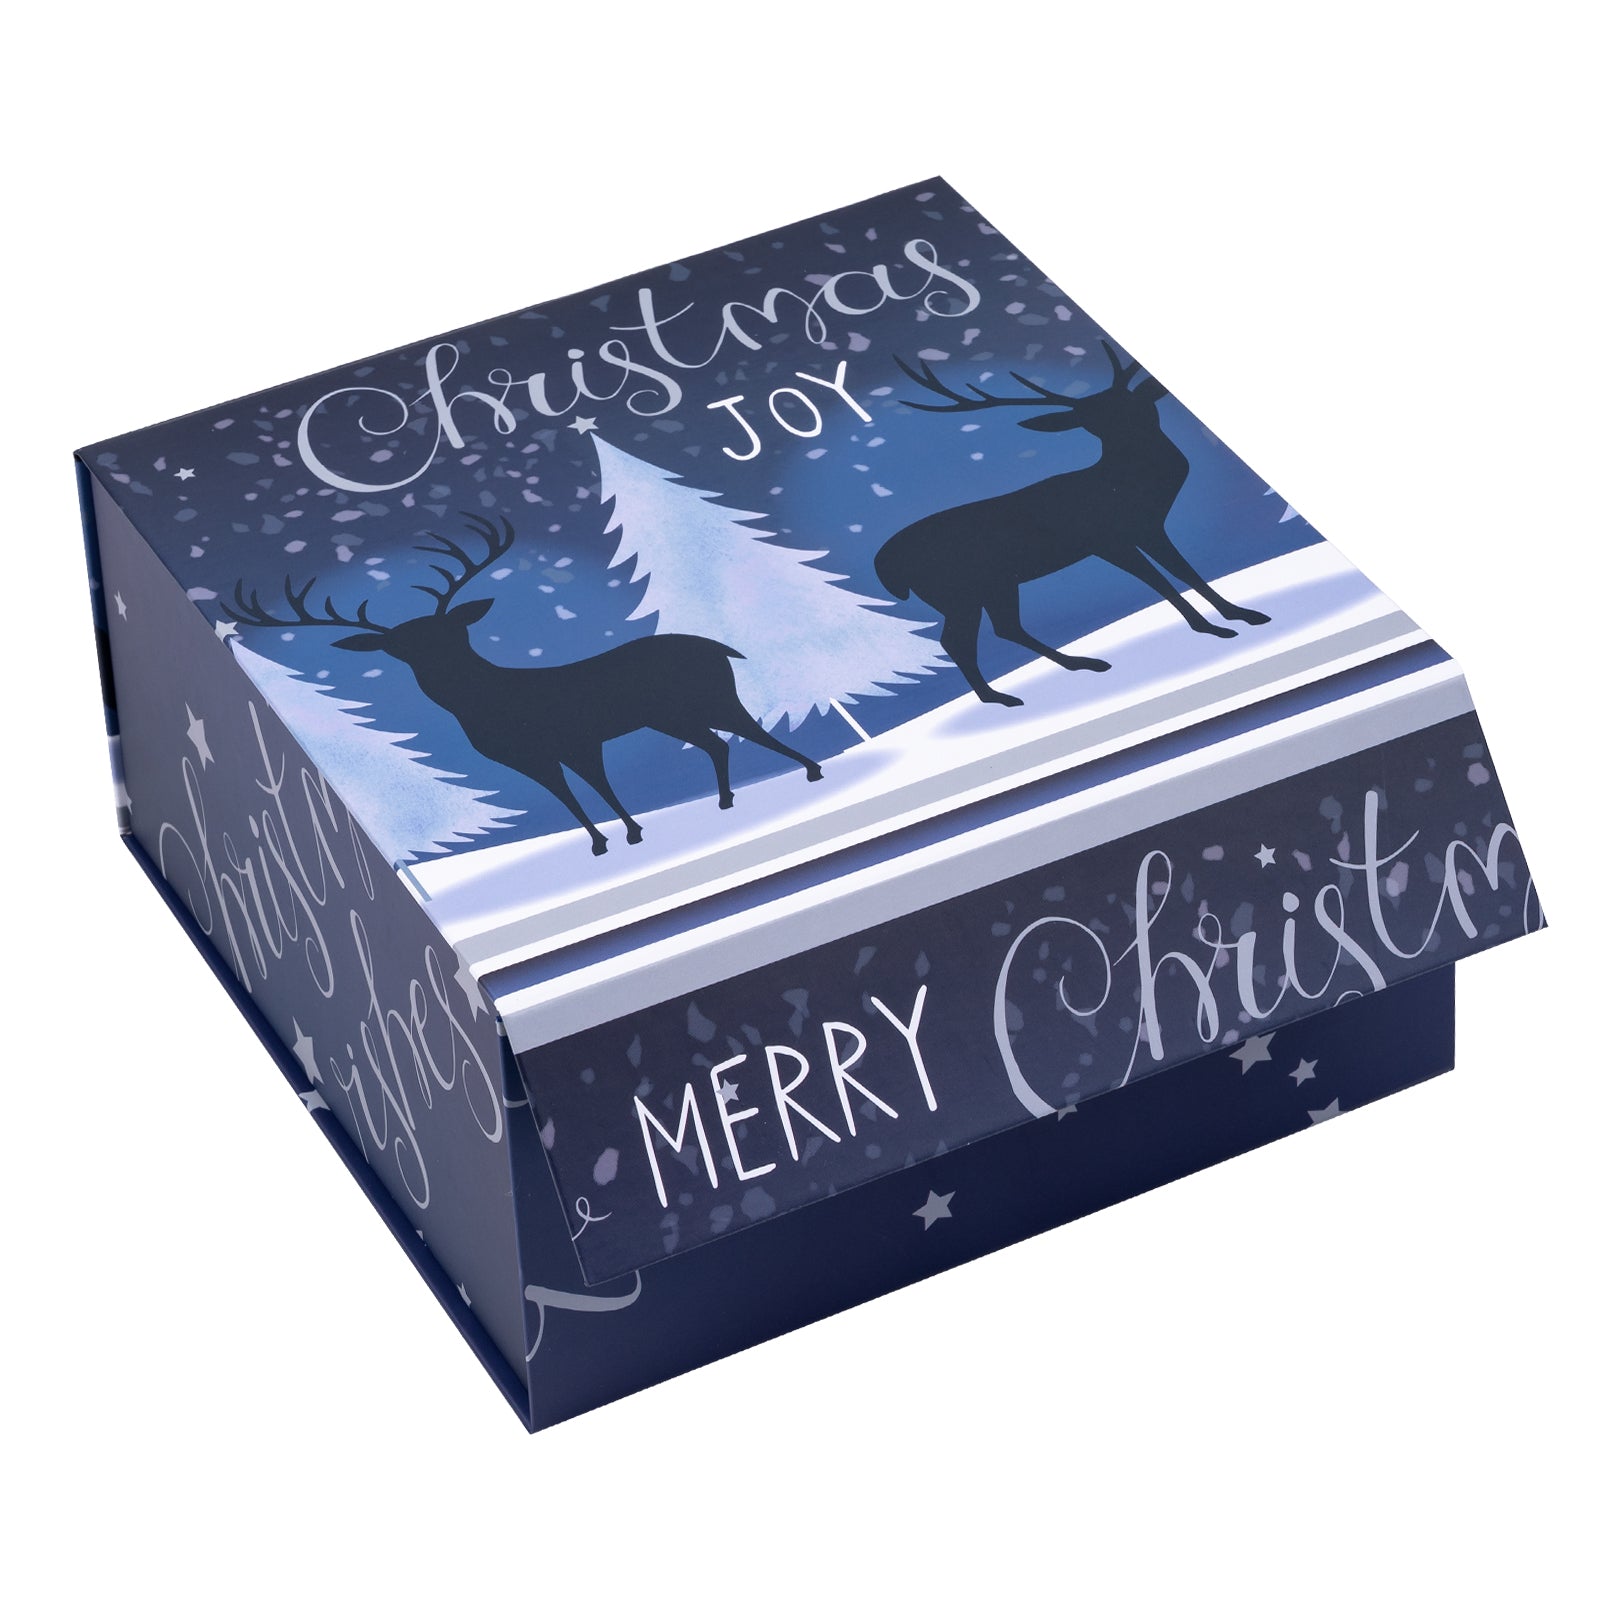 8x8x4 inch Collapsible Gift Box with Magnetic Closure - Night Reindeer